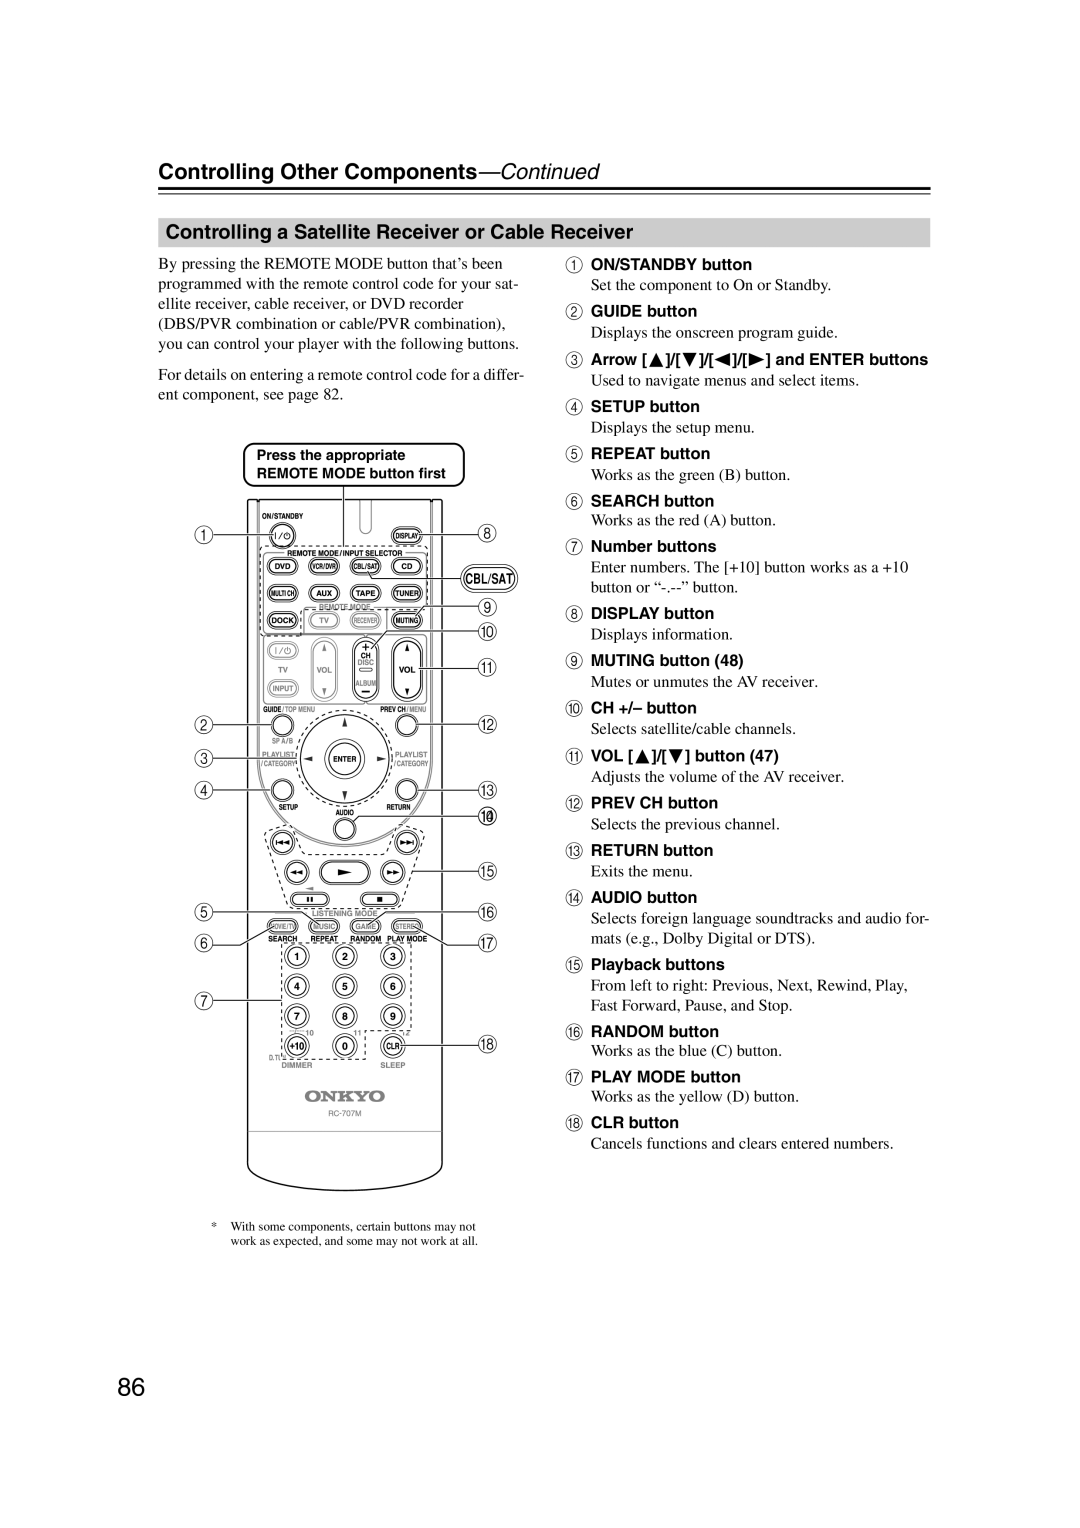 Onkyo HT-S5100 instruction manual Controlling Other Components—Continued, AON/STANDBY button 